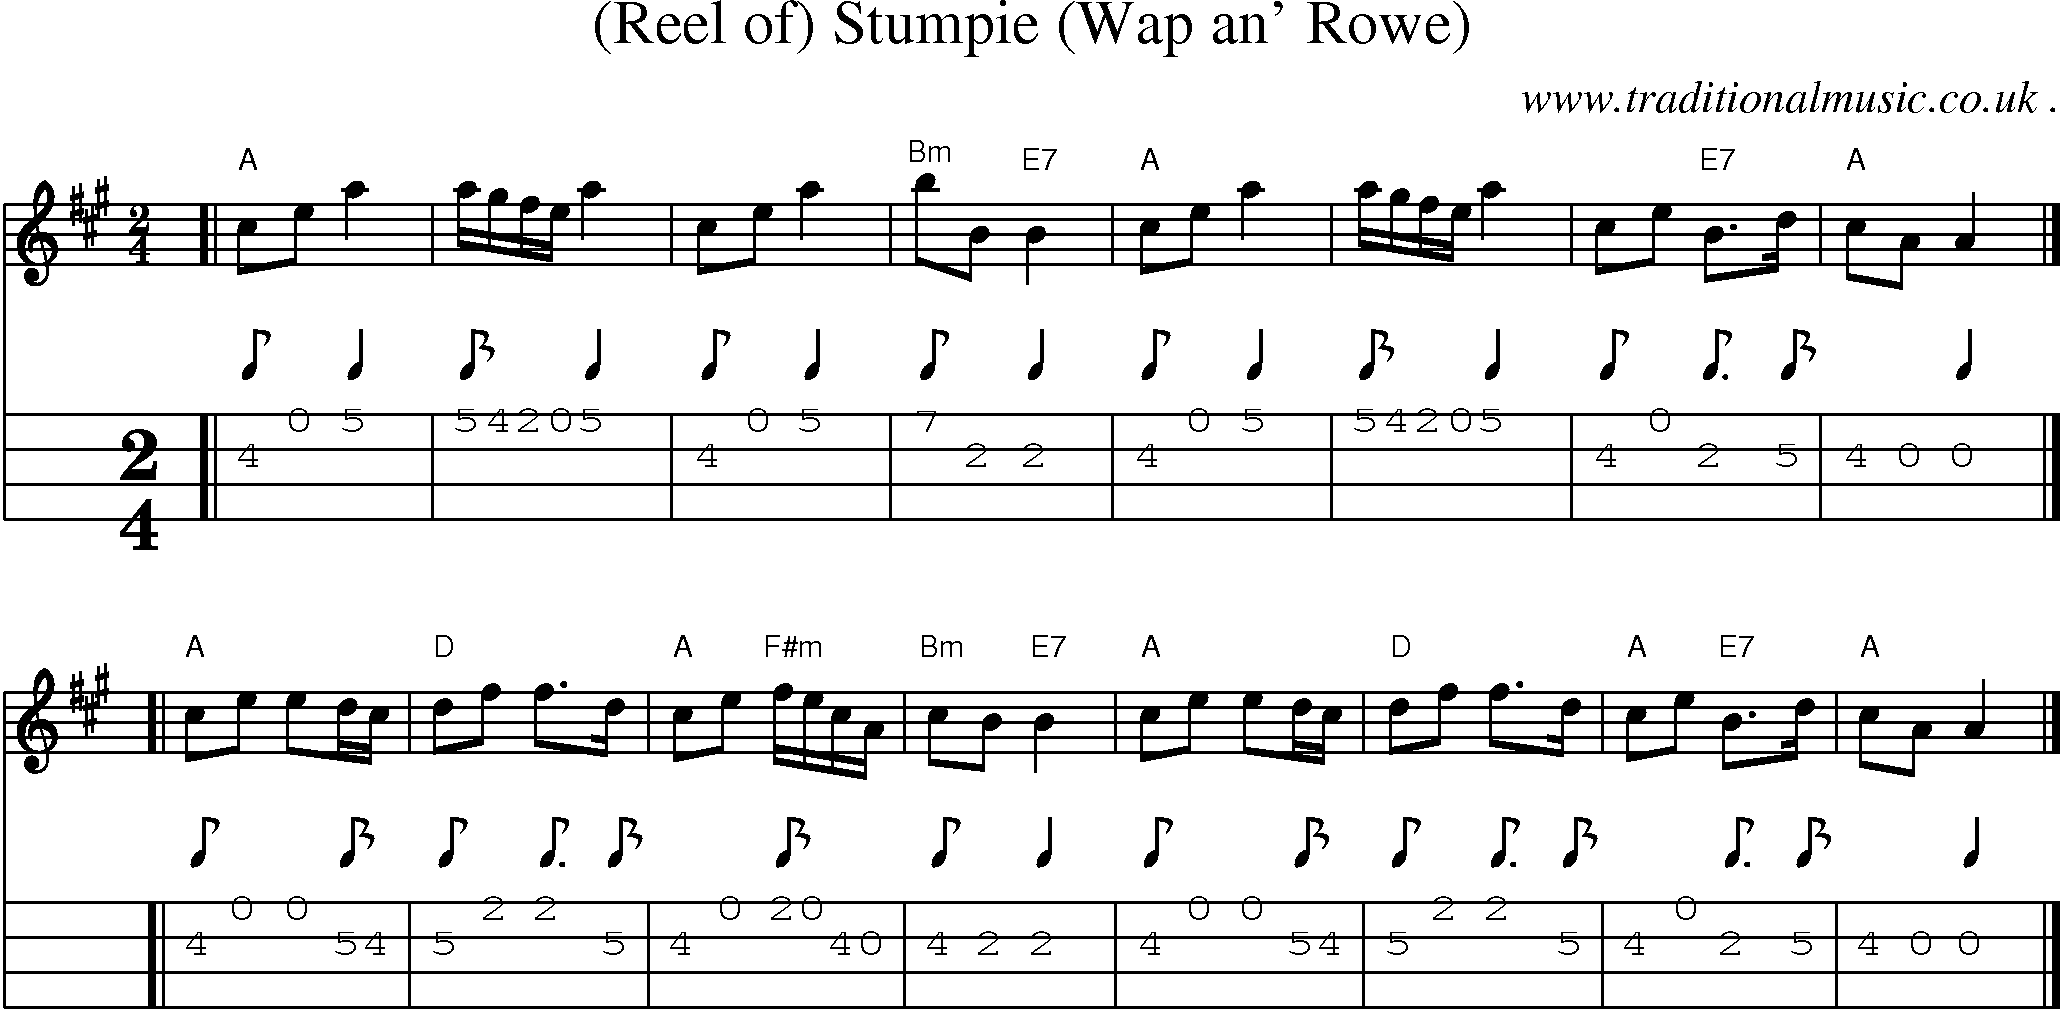 Sheet-music  score, Chords and Mandolin Tabs for Reel Of Stumpie Wap An Rowe